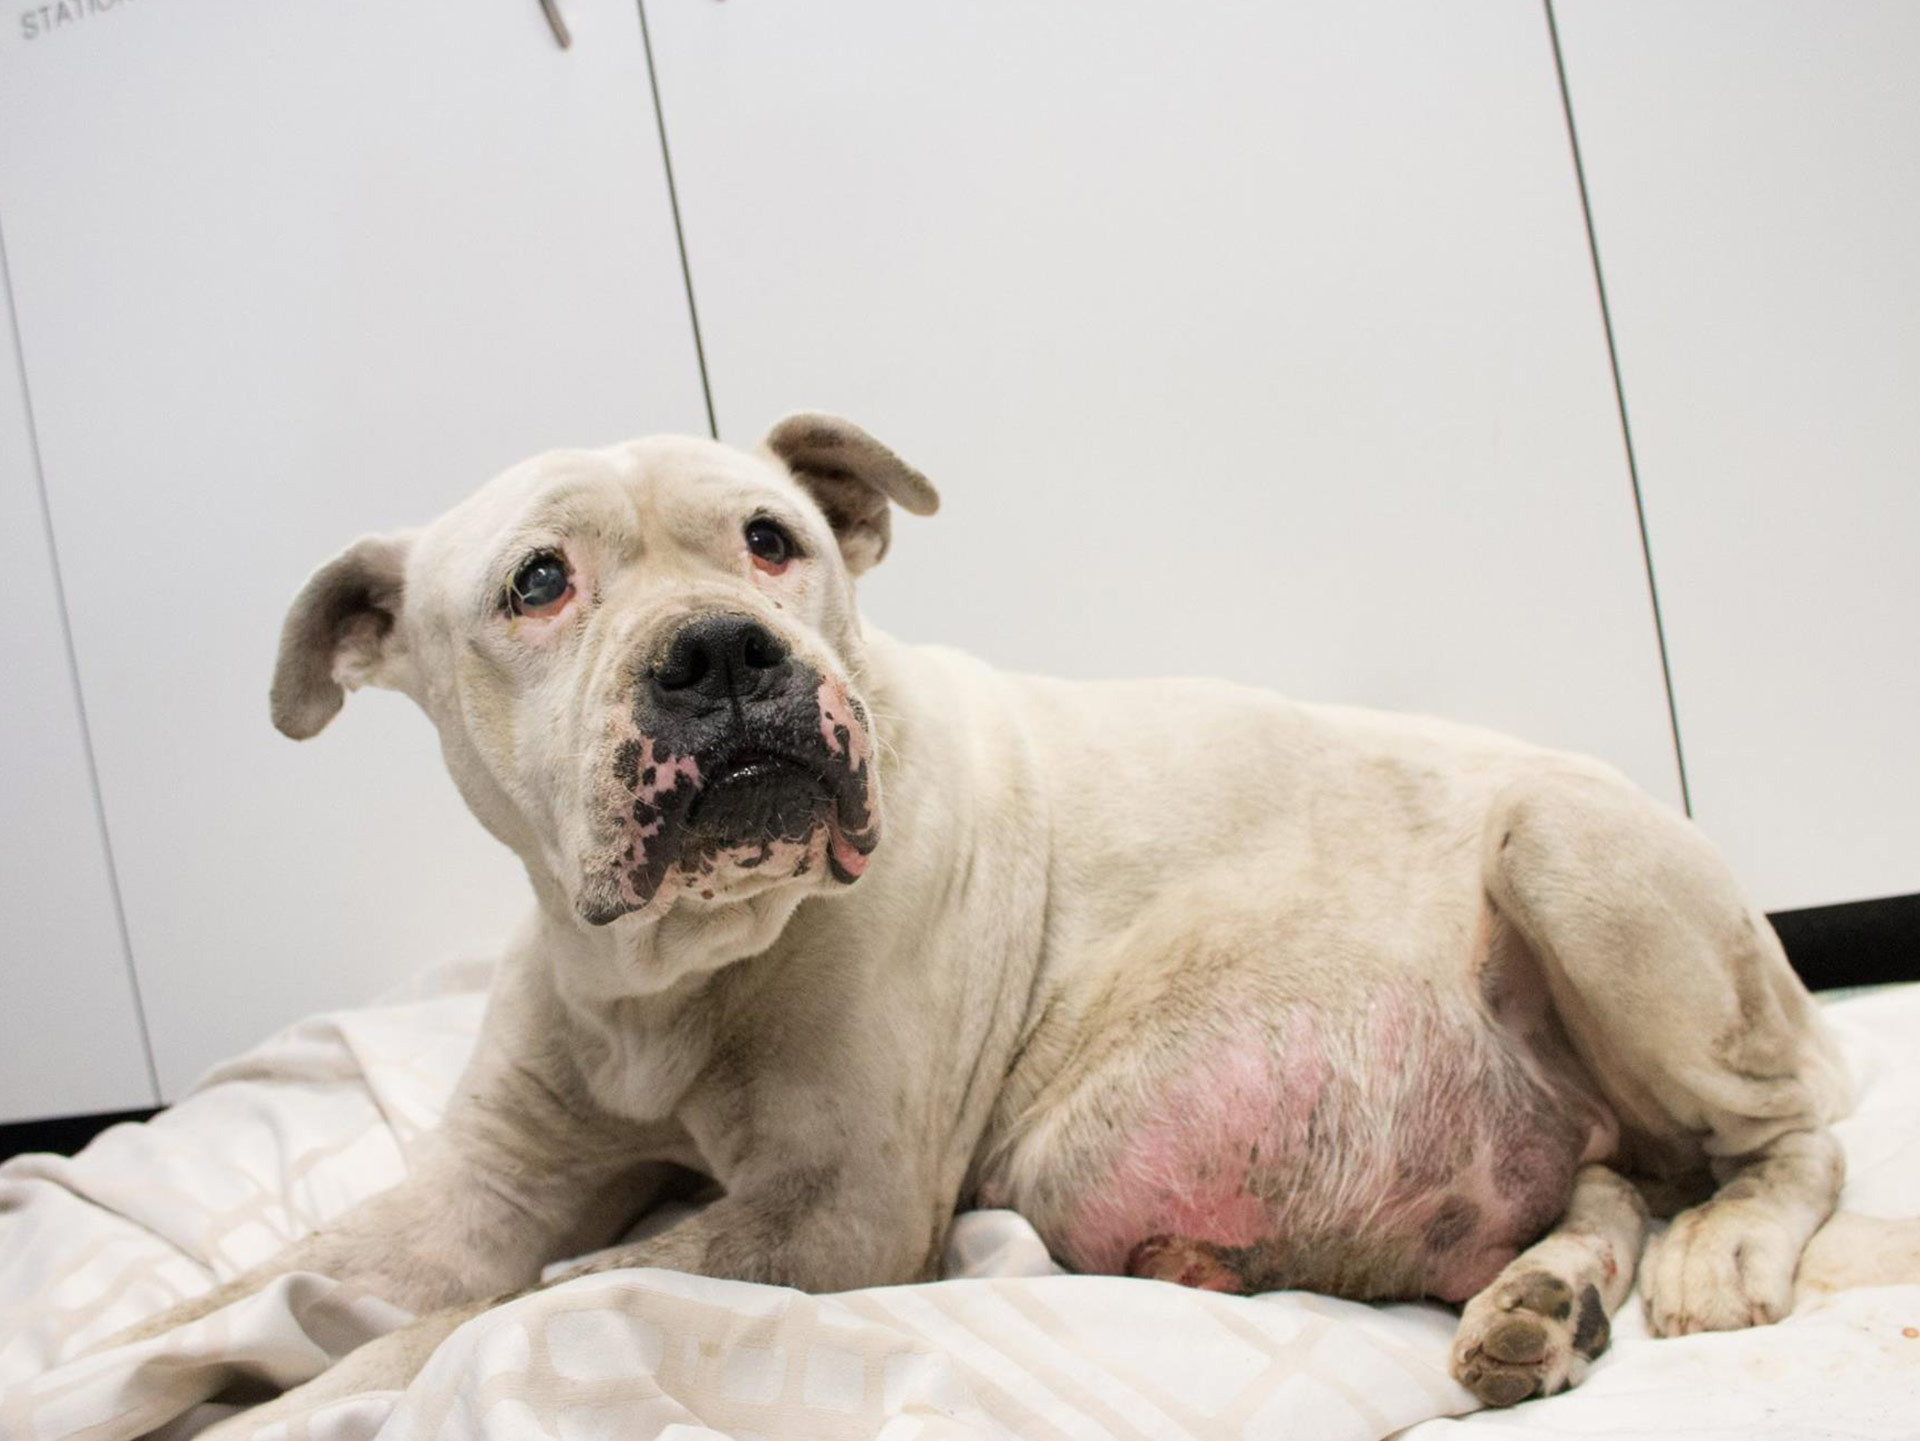 The RSPCA need your help to locate the person who did this to Chyna